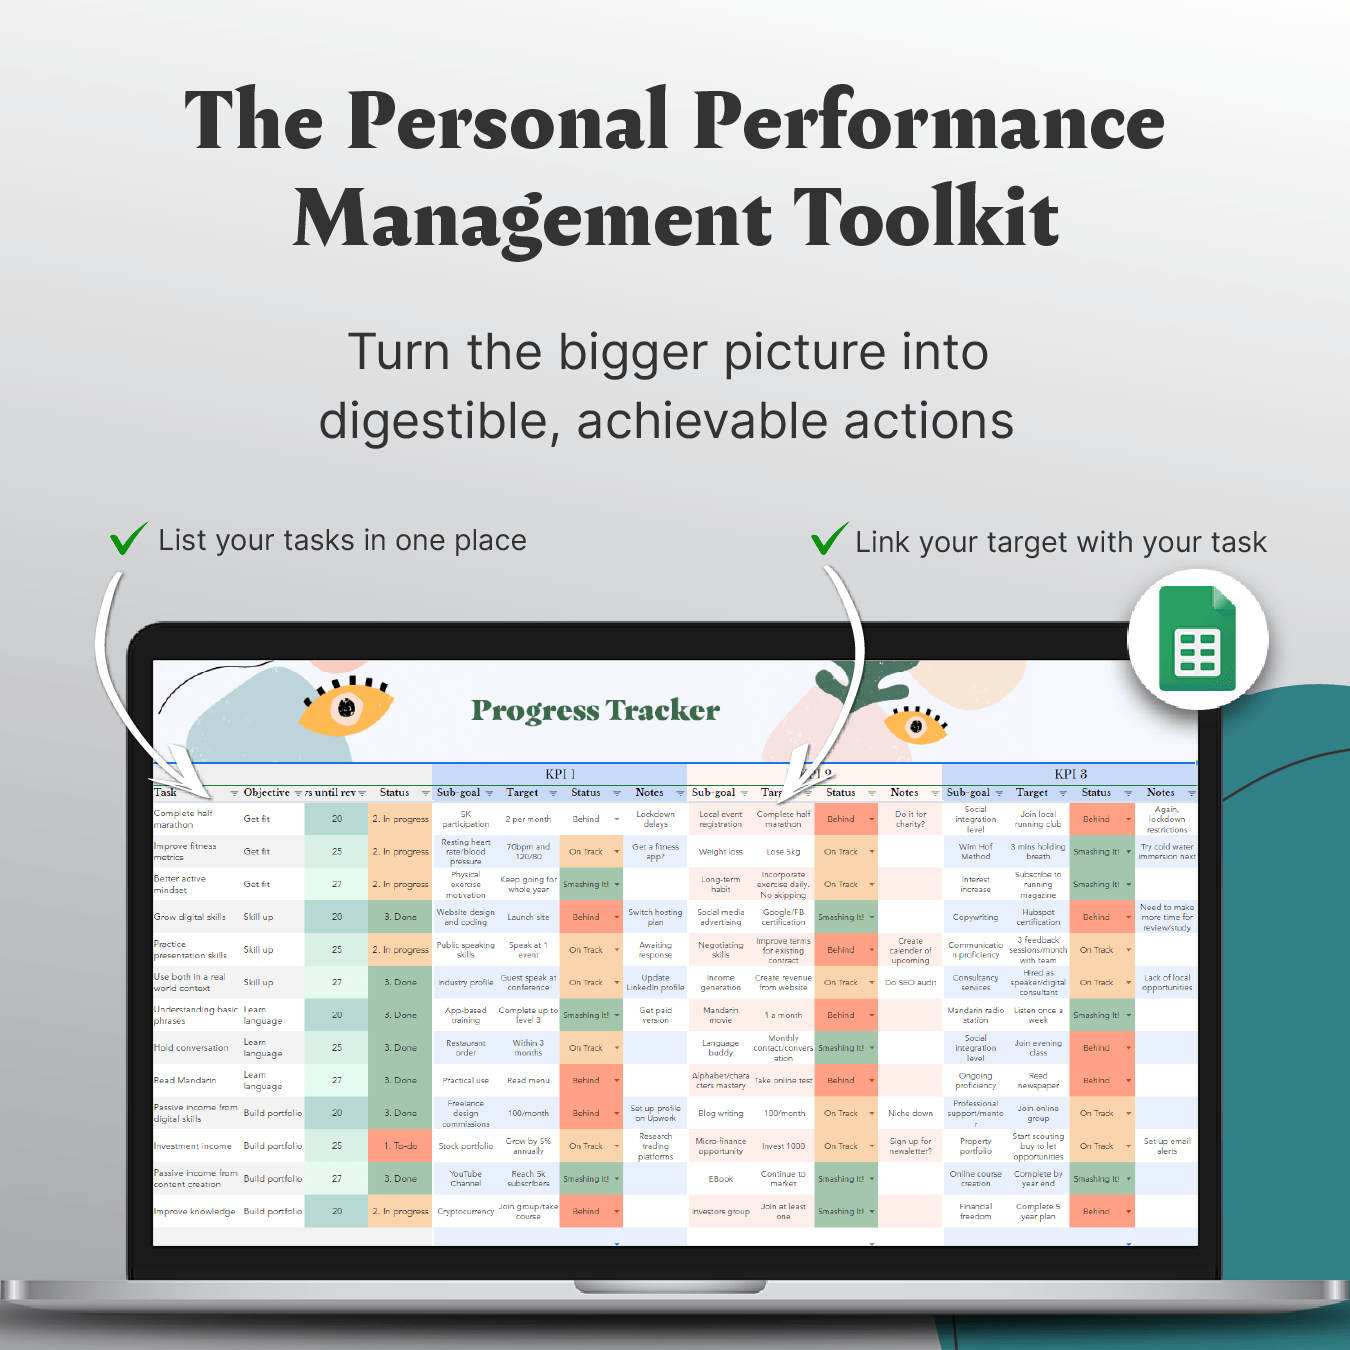 The Personal Performance Management Toolkit